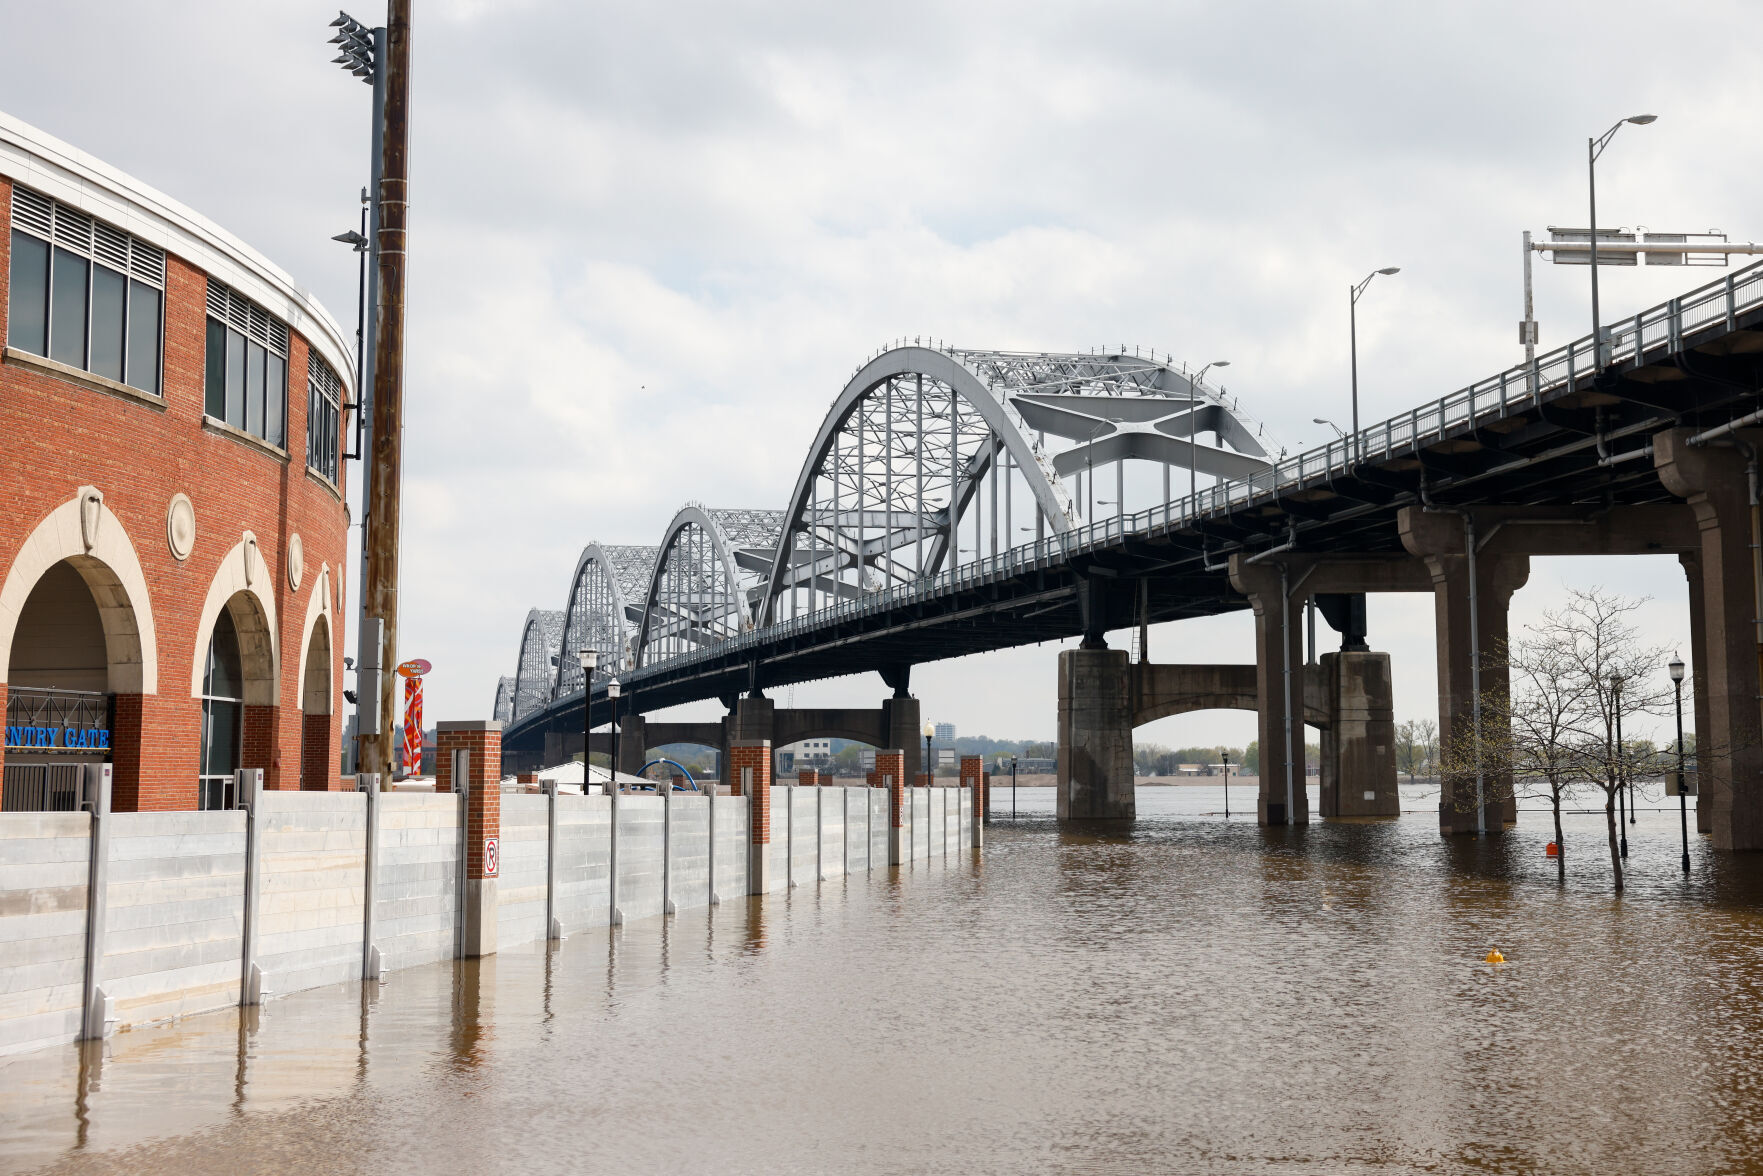 Disaster declaration issued for flooding on Mississippi River; more road closures, flood barriers up in QC